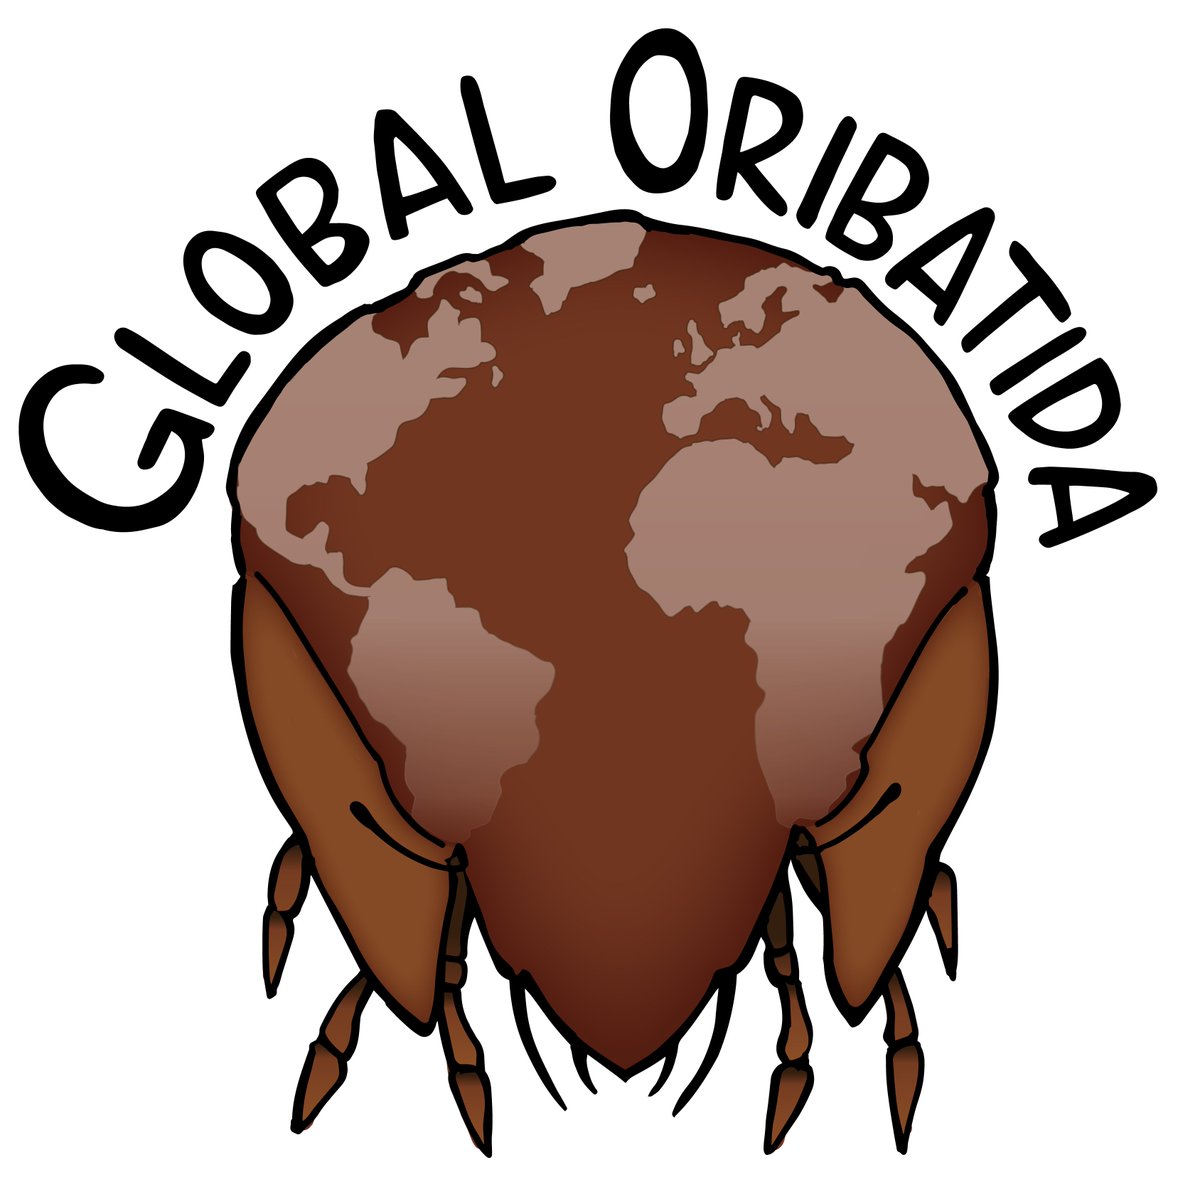 Just in time for the #GSB3: a fresh logo for the new Global Oribatida Initiative. 

If you wanna know more about the initiative meet Doro Sandmann and Jing-Zhong Lu @logos_lu in Dublin (Poster No 30).